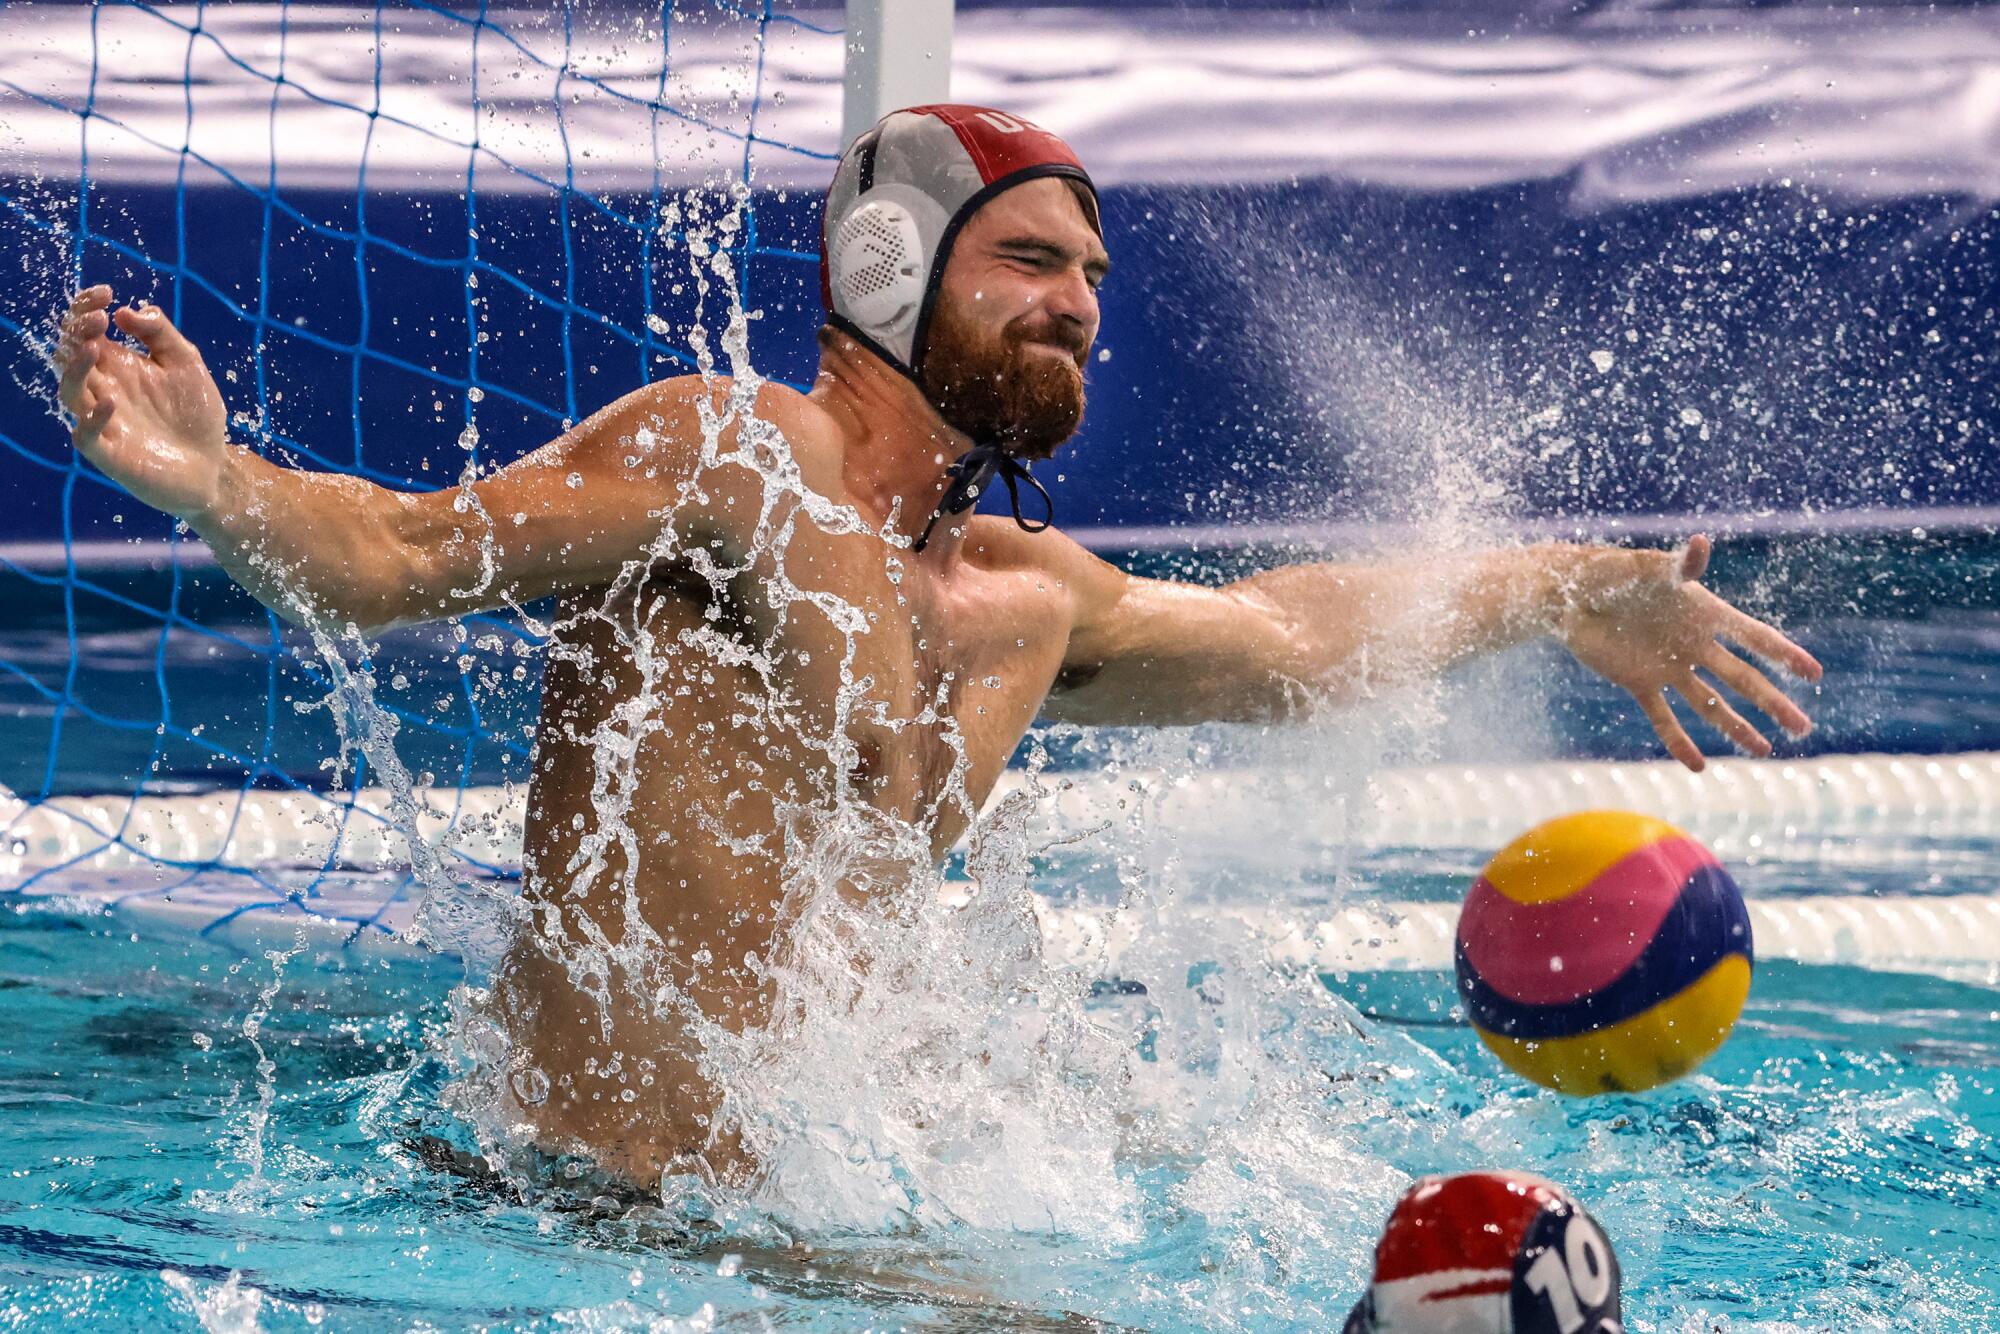 Goalkeeper Alex Wolf deflects the ball for the U.S. during water polo at the Tokyo Olympics.